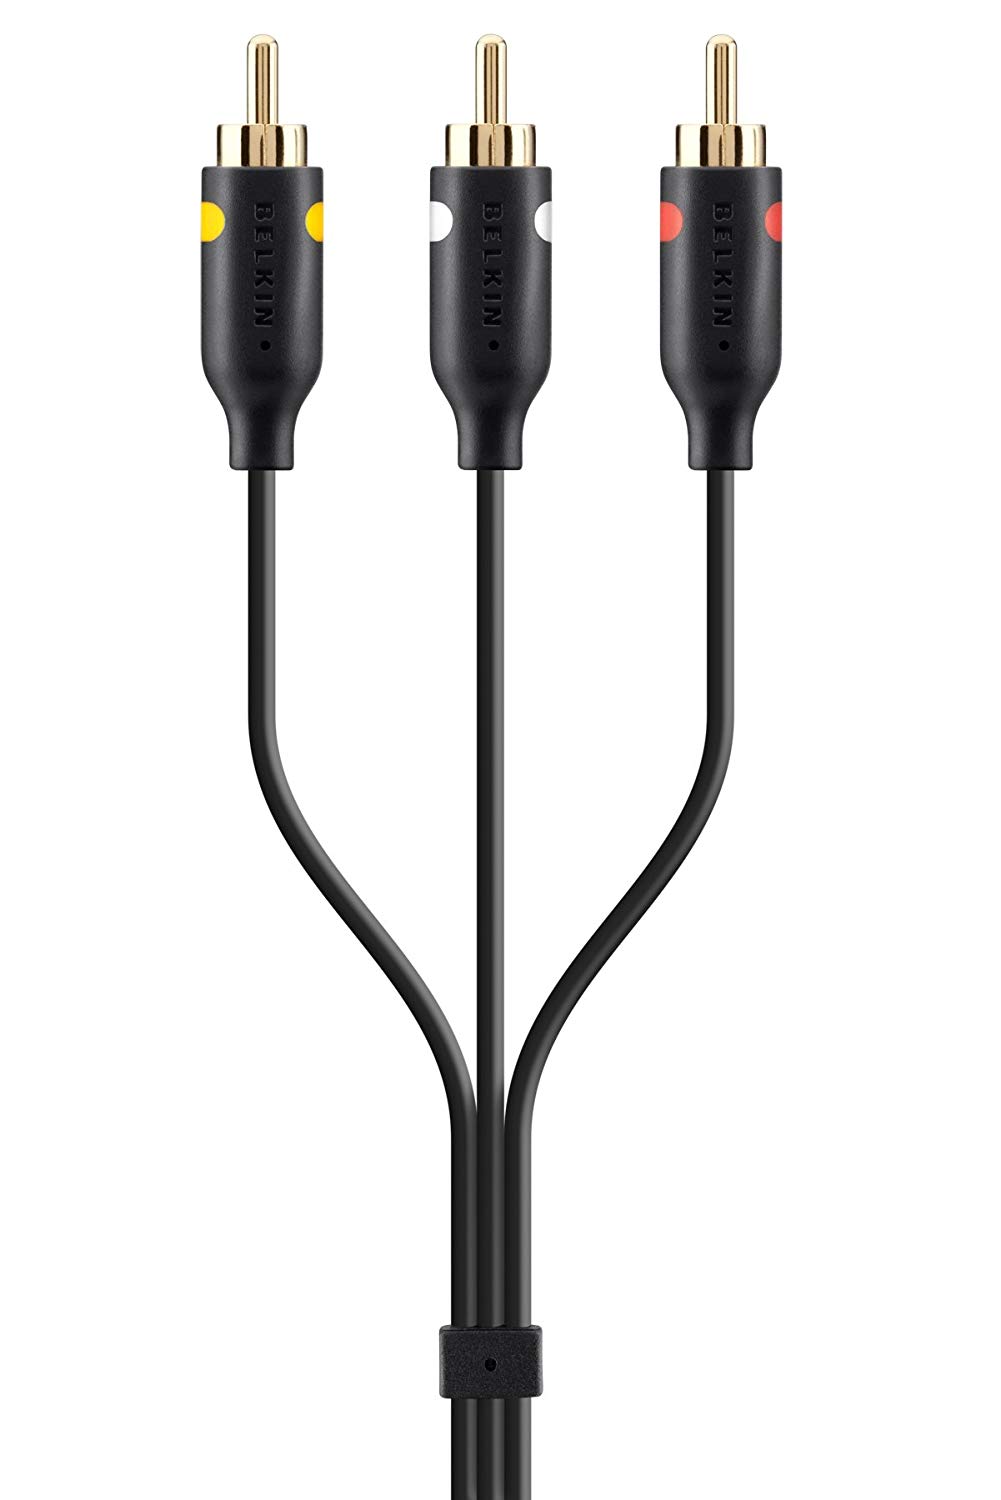 Belkin F3Y084bf2M Composite/RCA Audio Video Cable (Black)